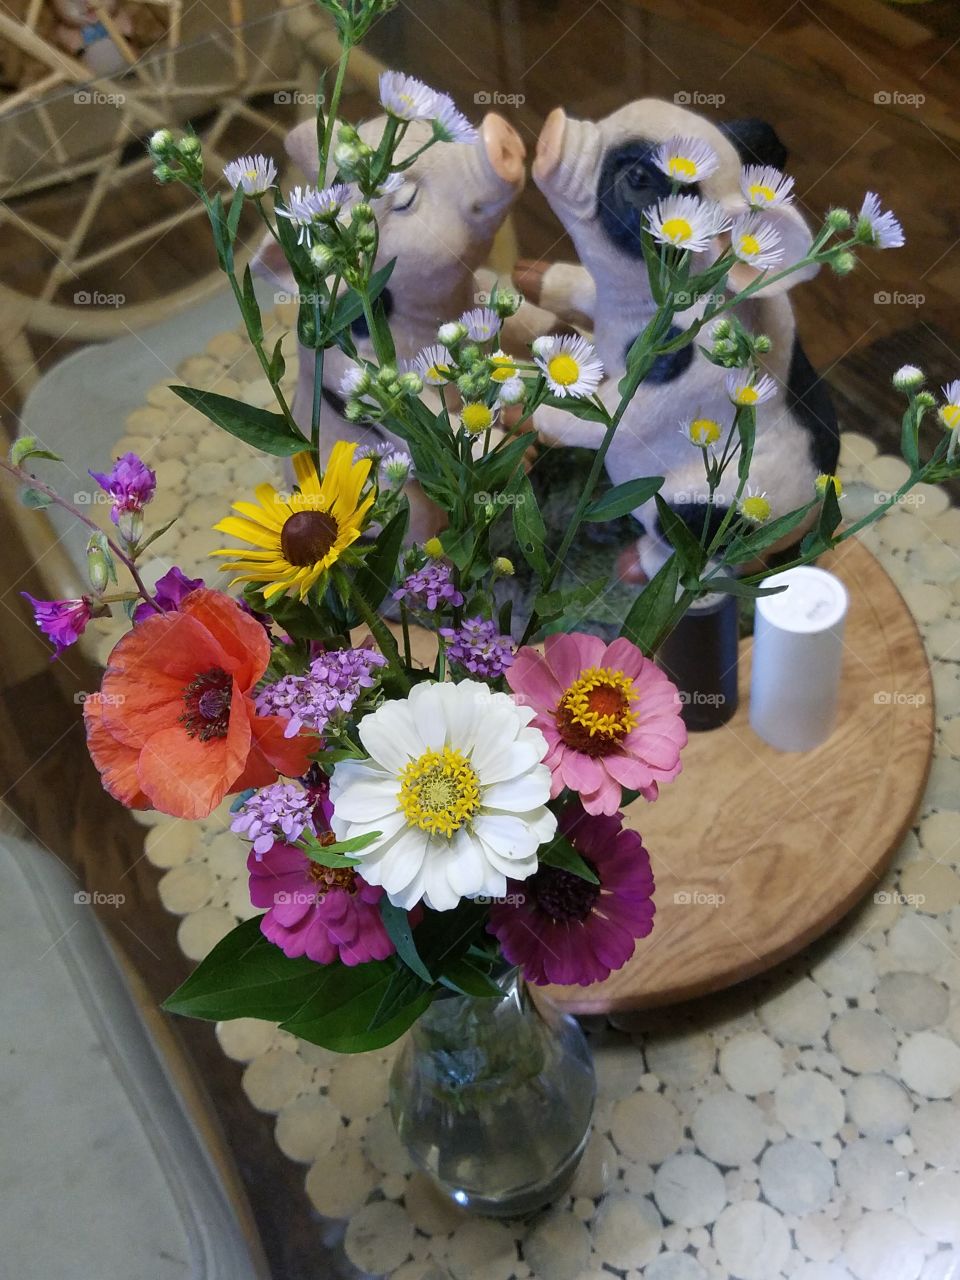 some flowers i picked for my beautiful wife.